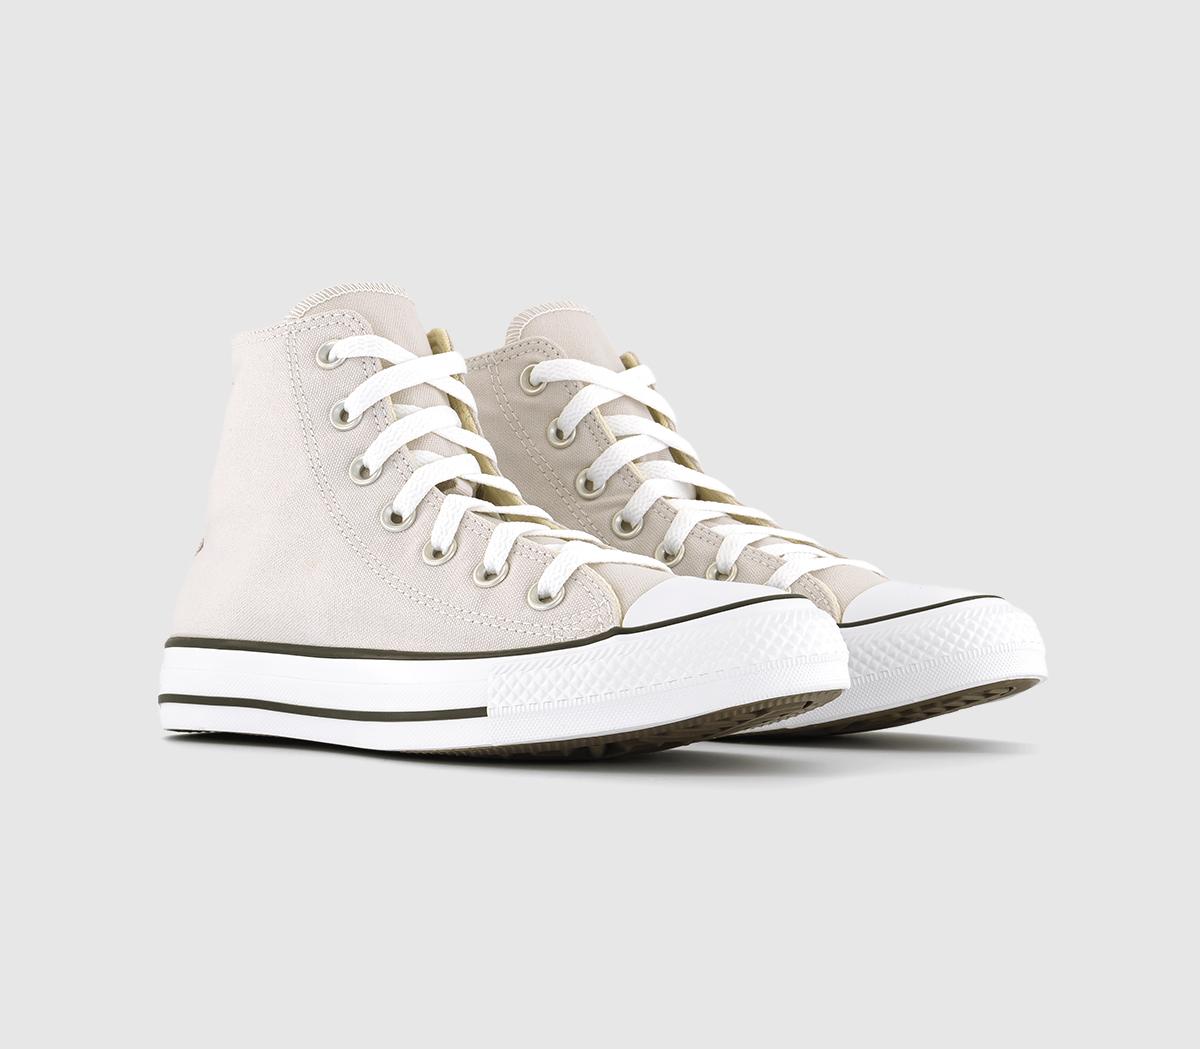 Converse All Star Hi Trainers Pale Putty White Black Natural, 5.5